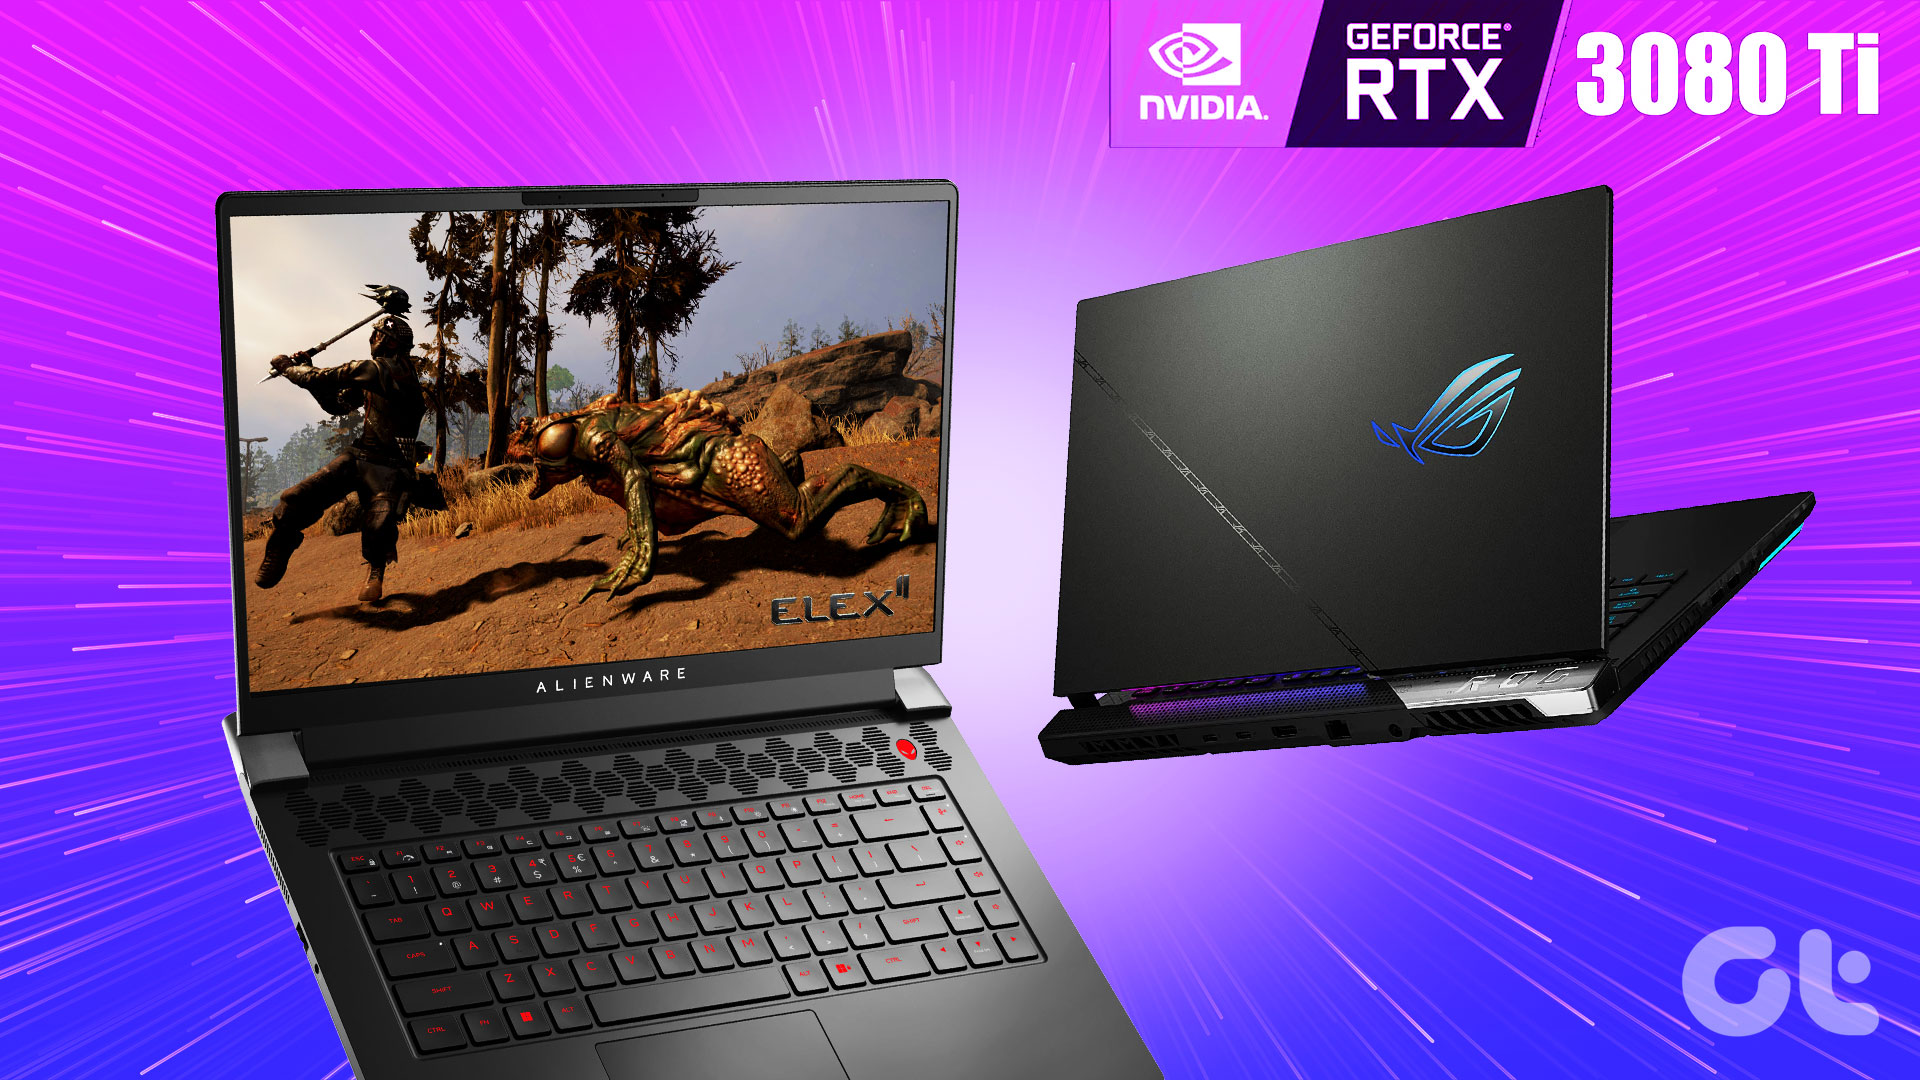 Gaming laptops with RTX 3080